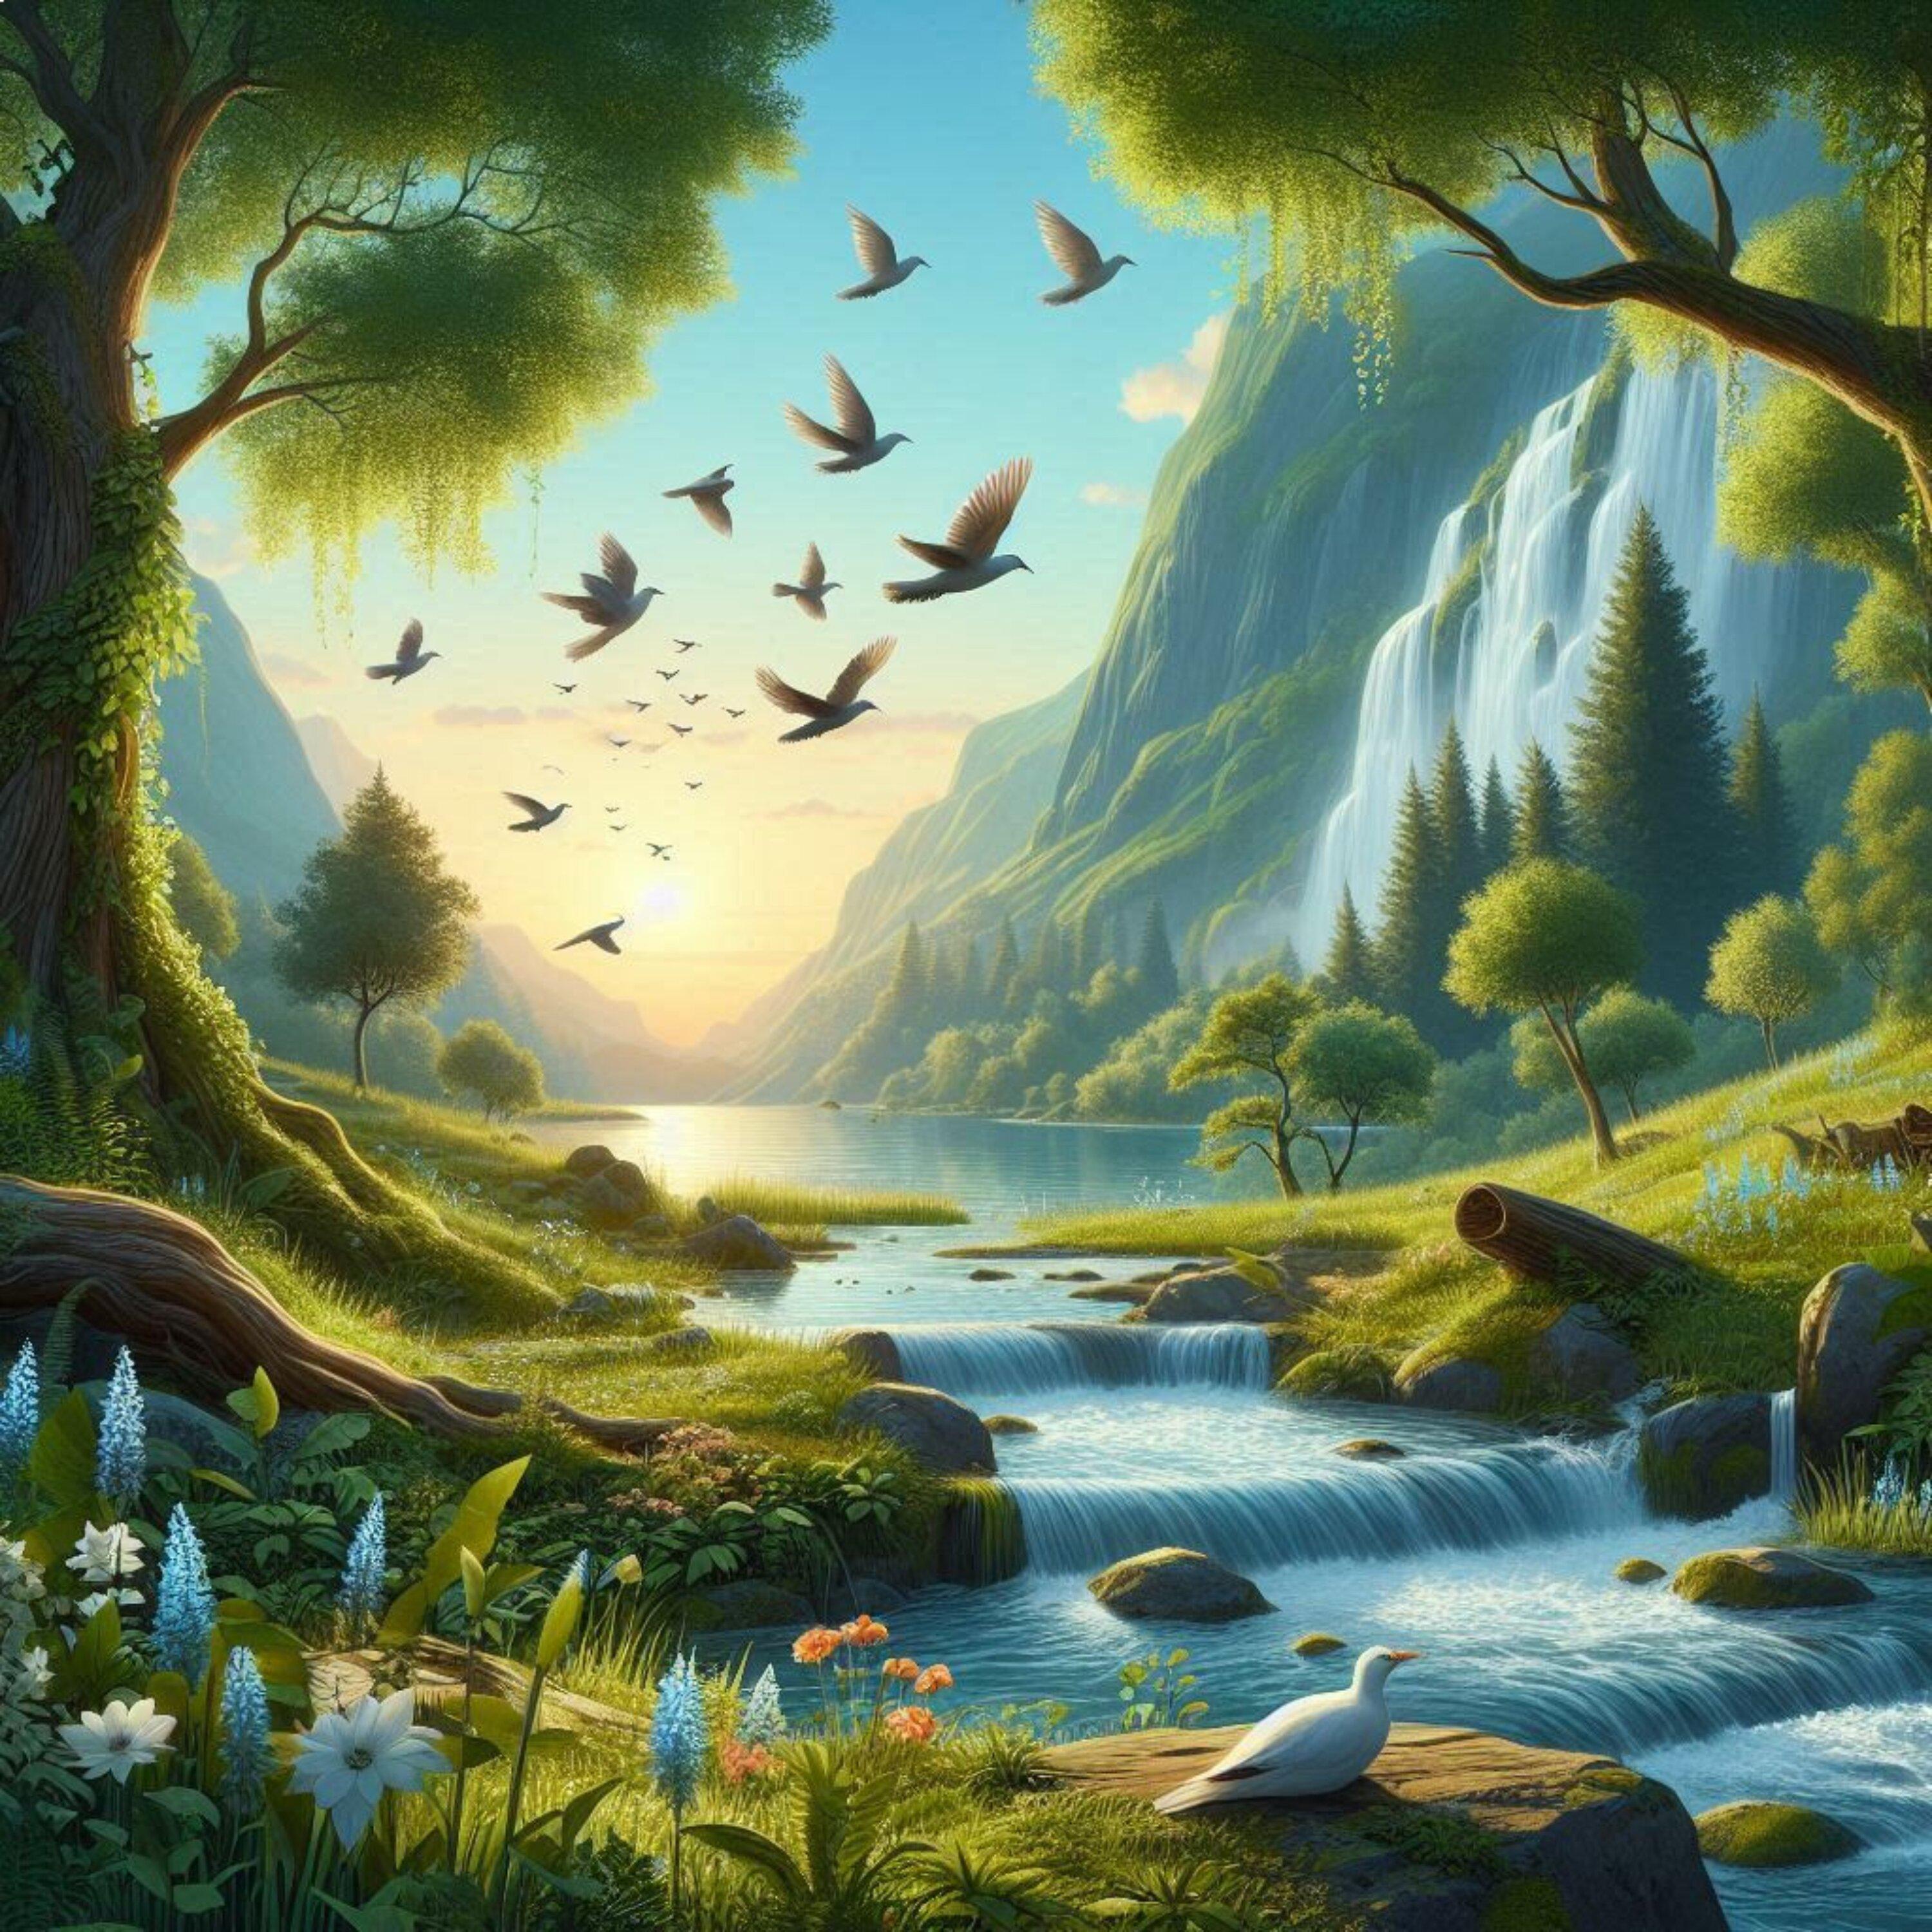 Zarek Atlas - Relaxing Landscape with Birds and Flowing Water in the Background 16